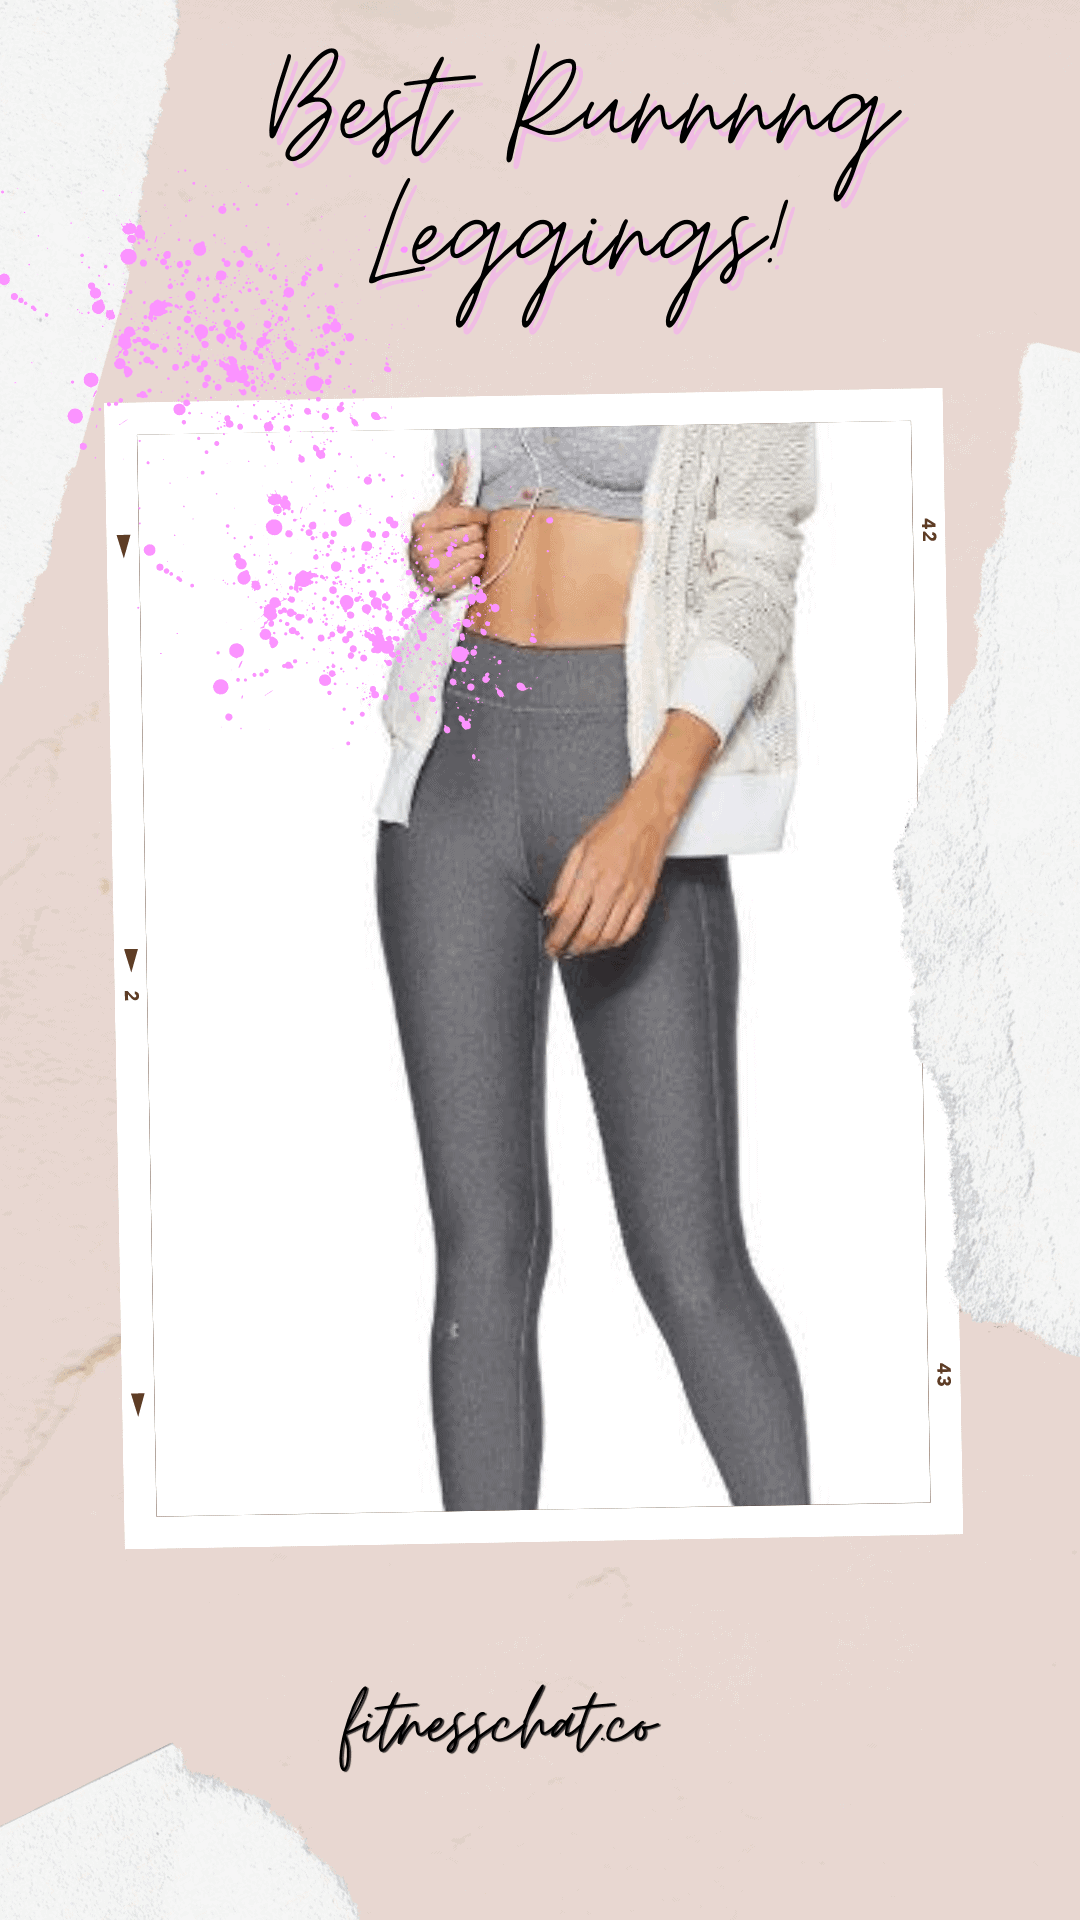 https://www.fitnesschat.co/wp-content/uploads/2020/08/best-running-leggings-that-dont-fall-down-1.png